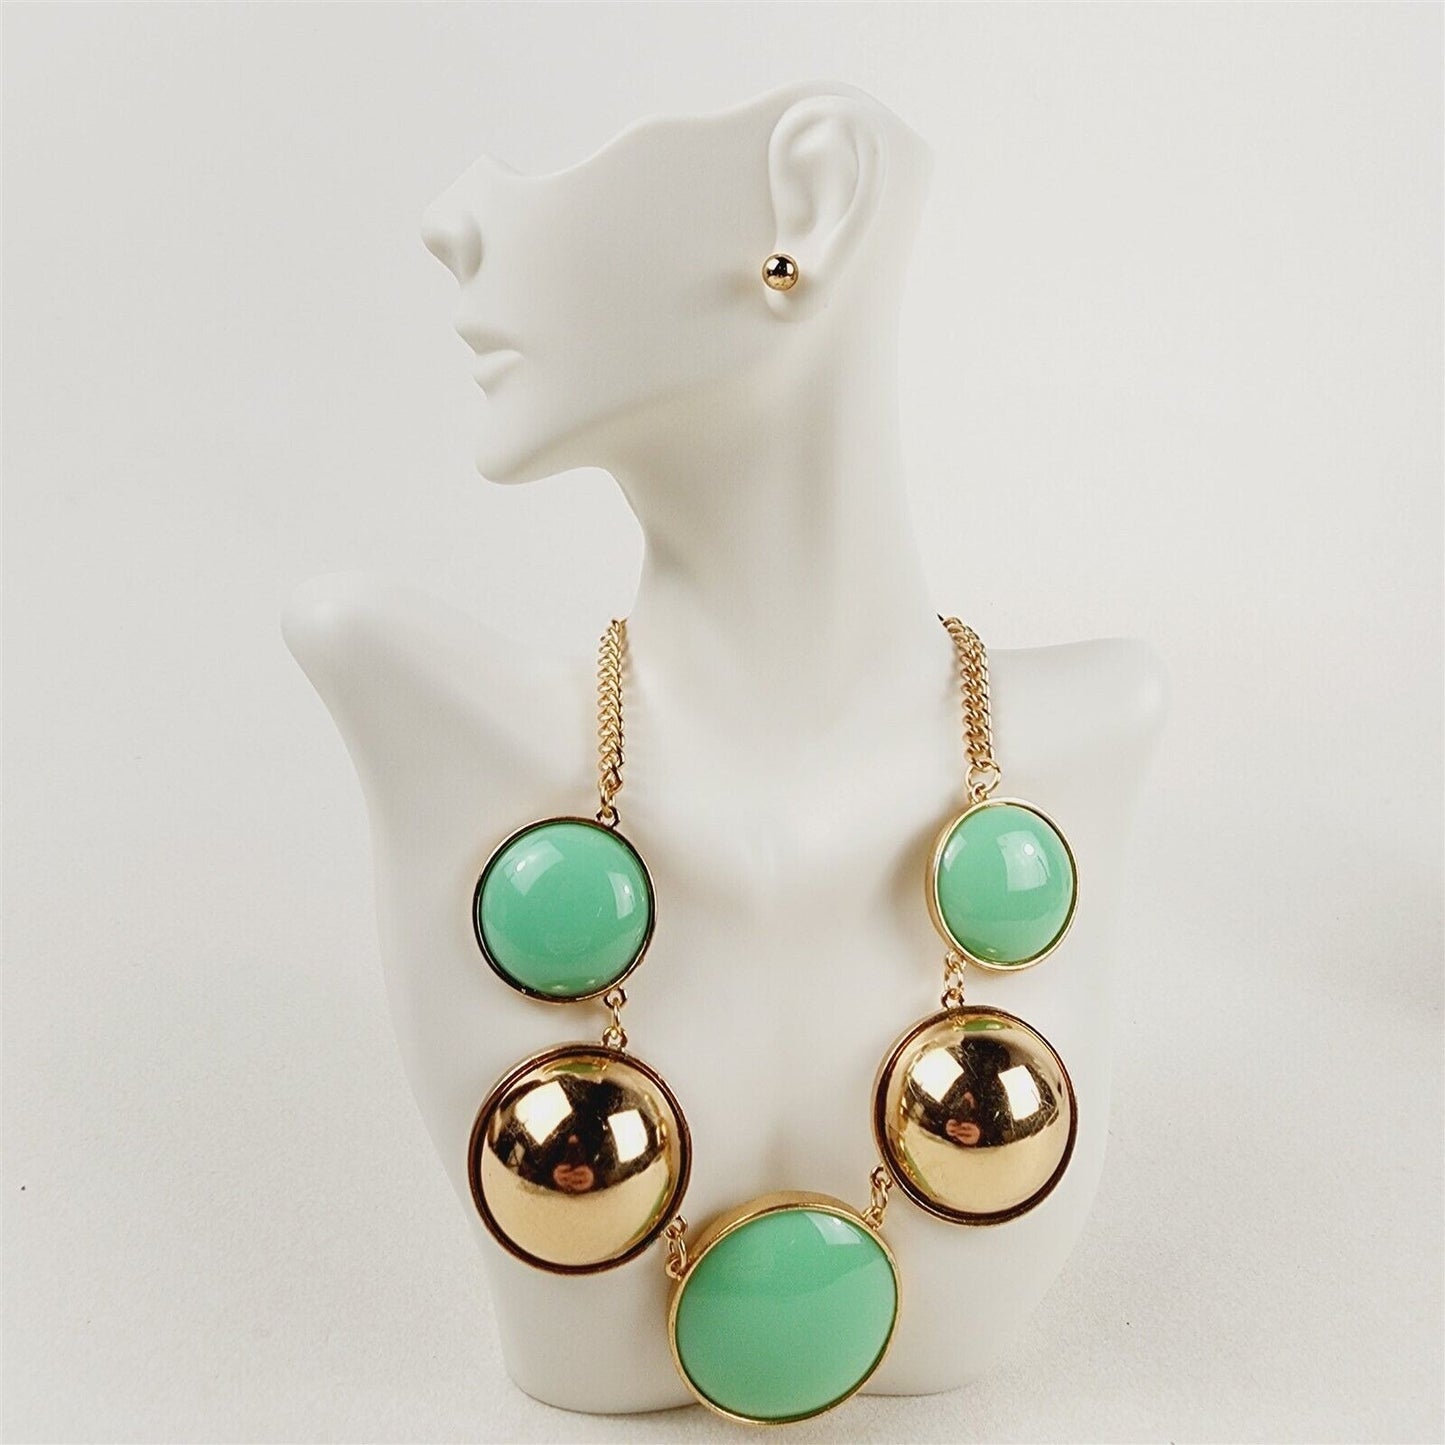 Gold & Mint Round Dome Necklace Earrings Fashion Jewelry Set